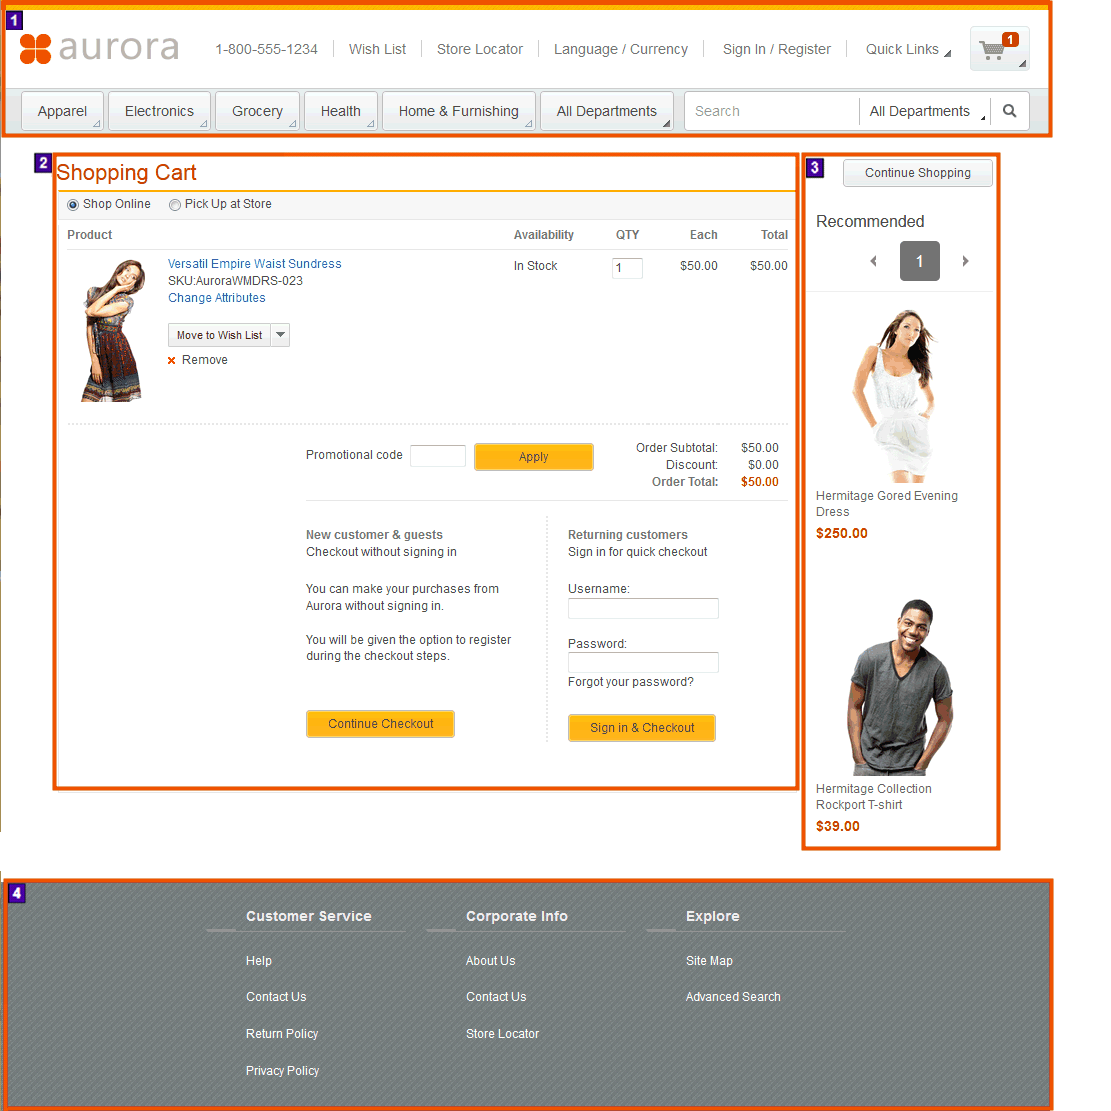 Screen capture, which shows the Shopping Cart page